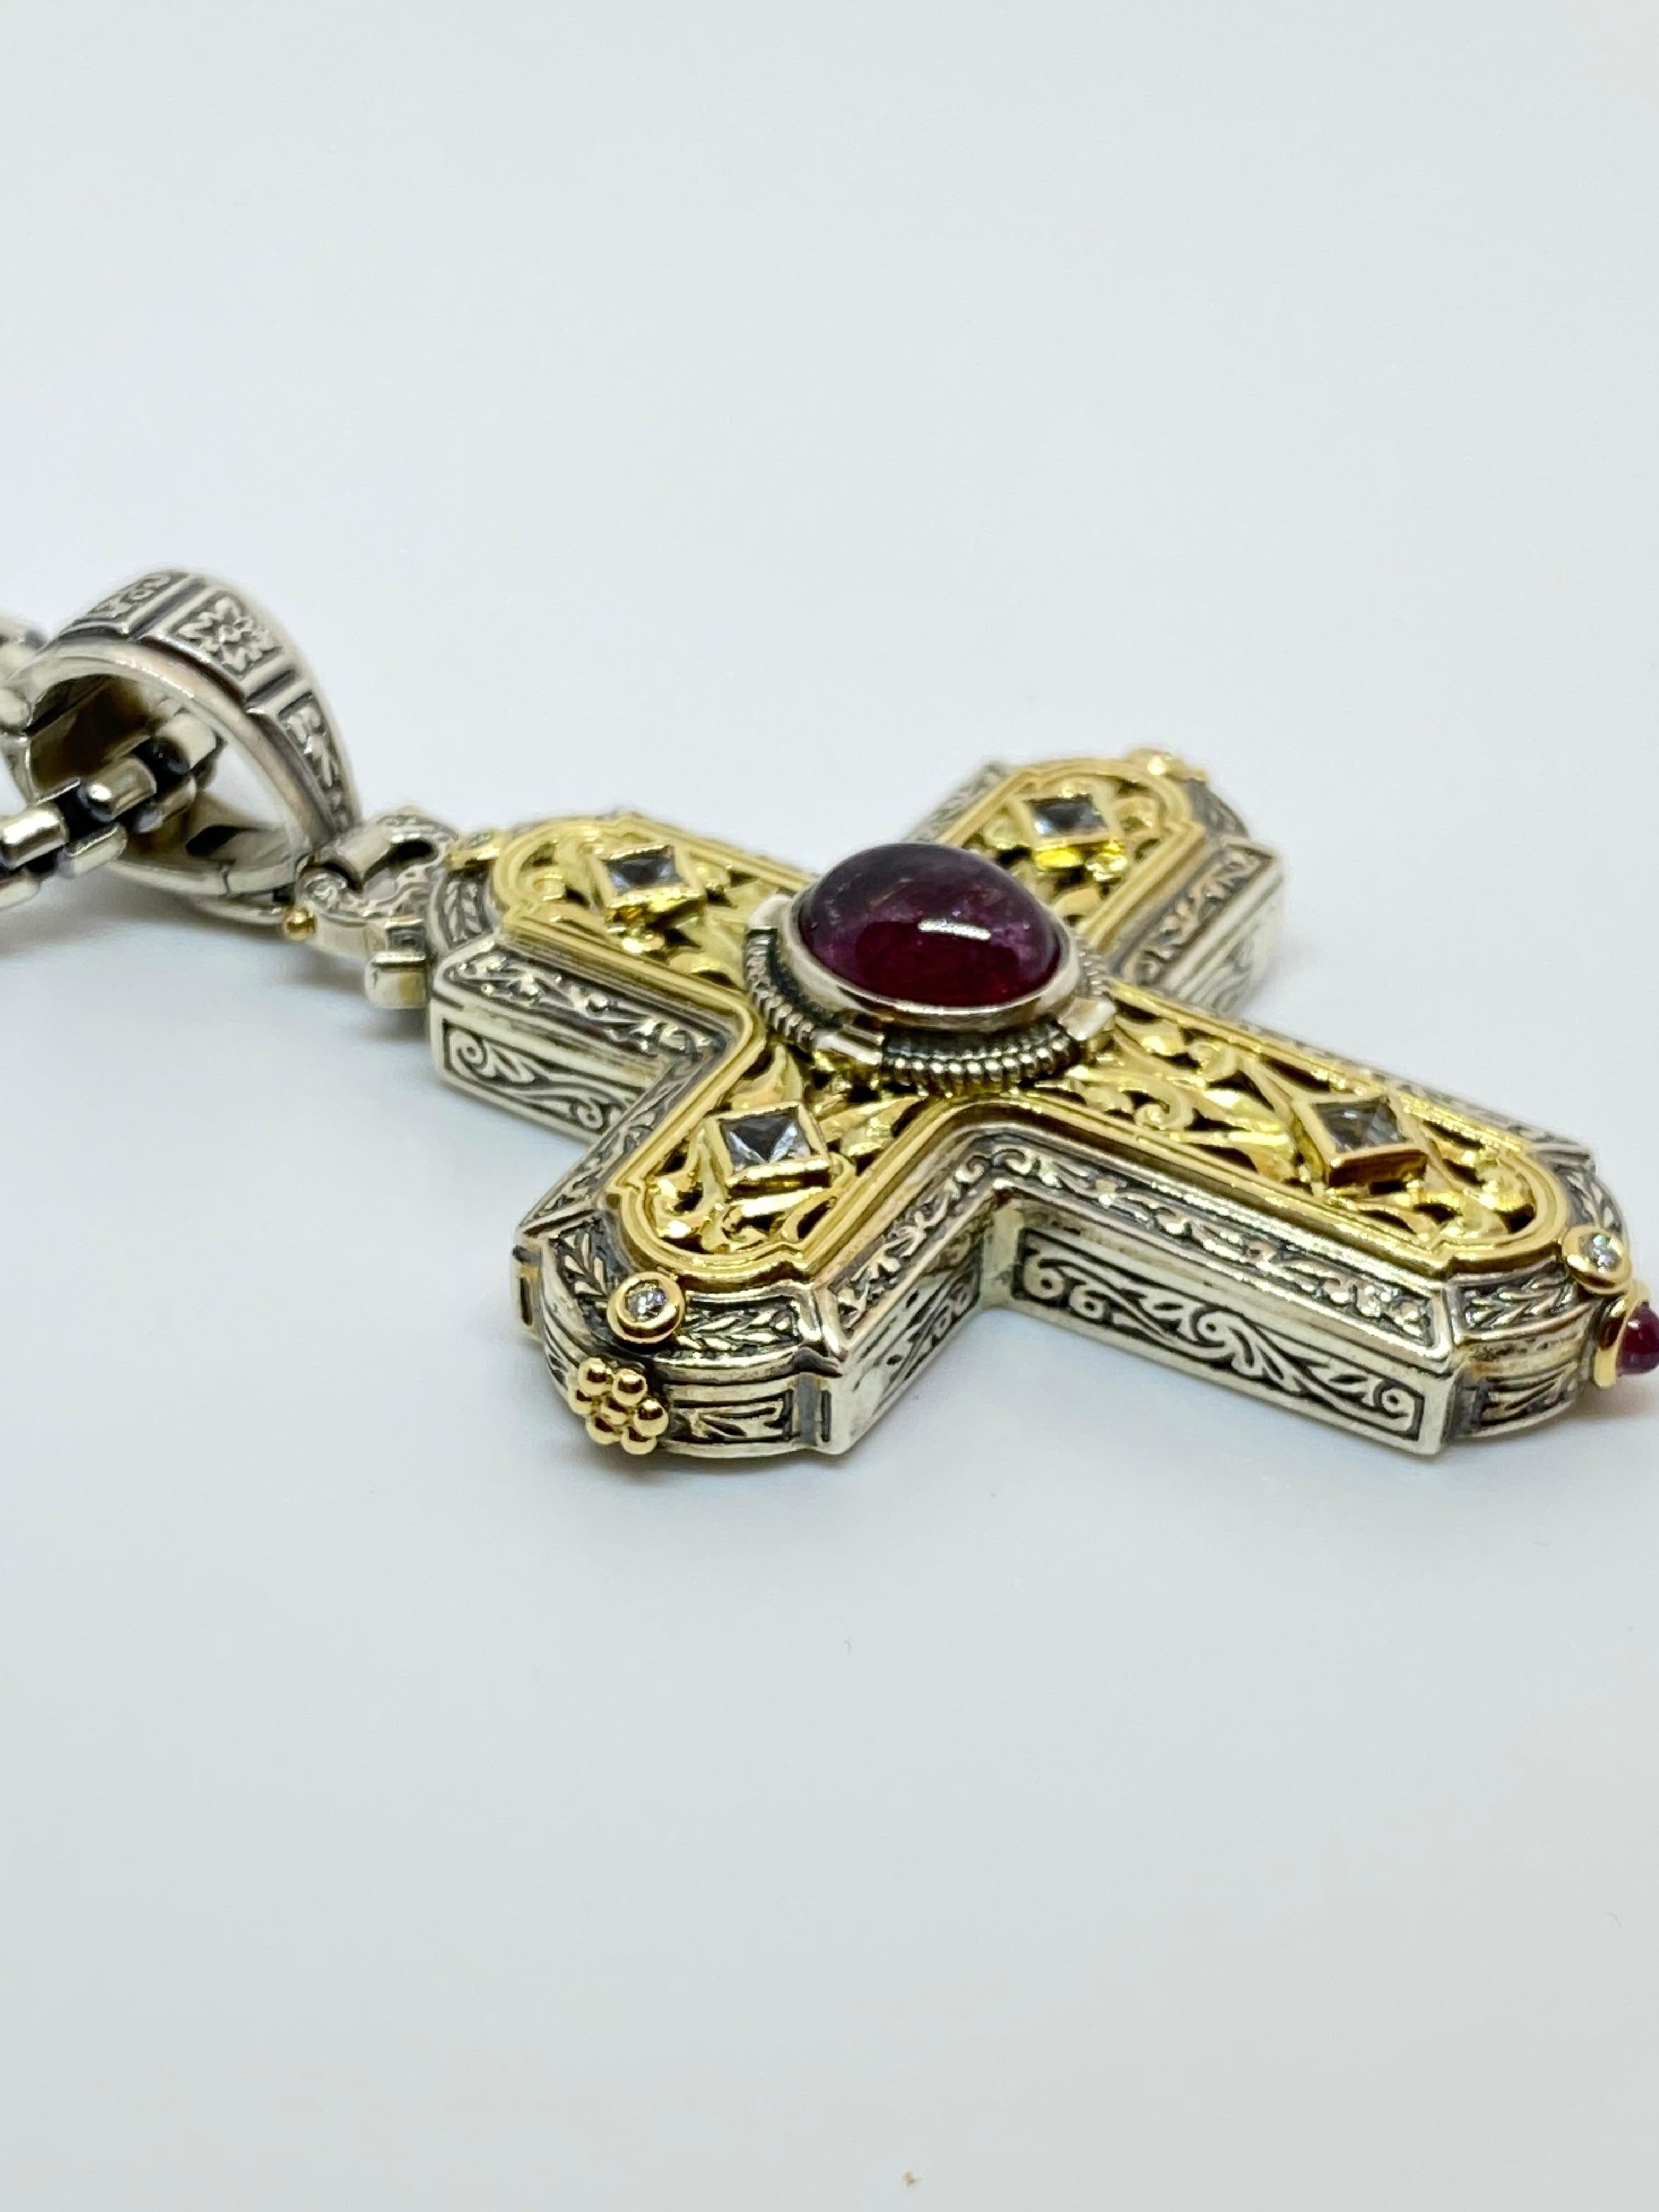 S.Georgios designer Silver and Gold 18K Cross pendant crafted from sterling silver 925 and solid 18 Karat yellow gold inlay to create a unique look. This gorgeous cross enhancer features 4 Diamonds total weight of 0.16 Carat, 2 Ruby cabochon the